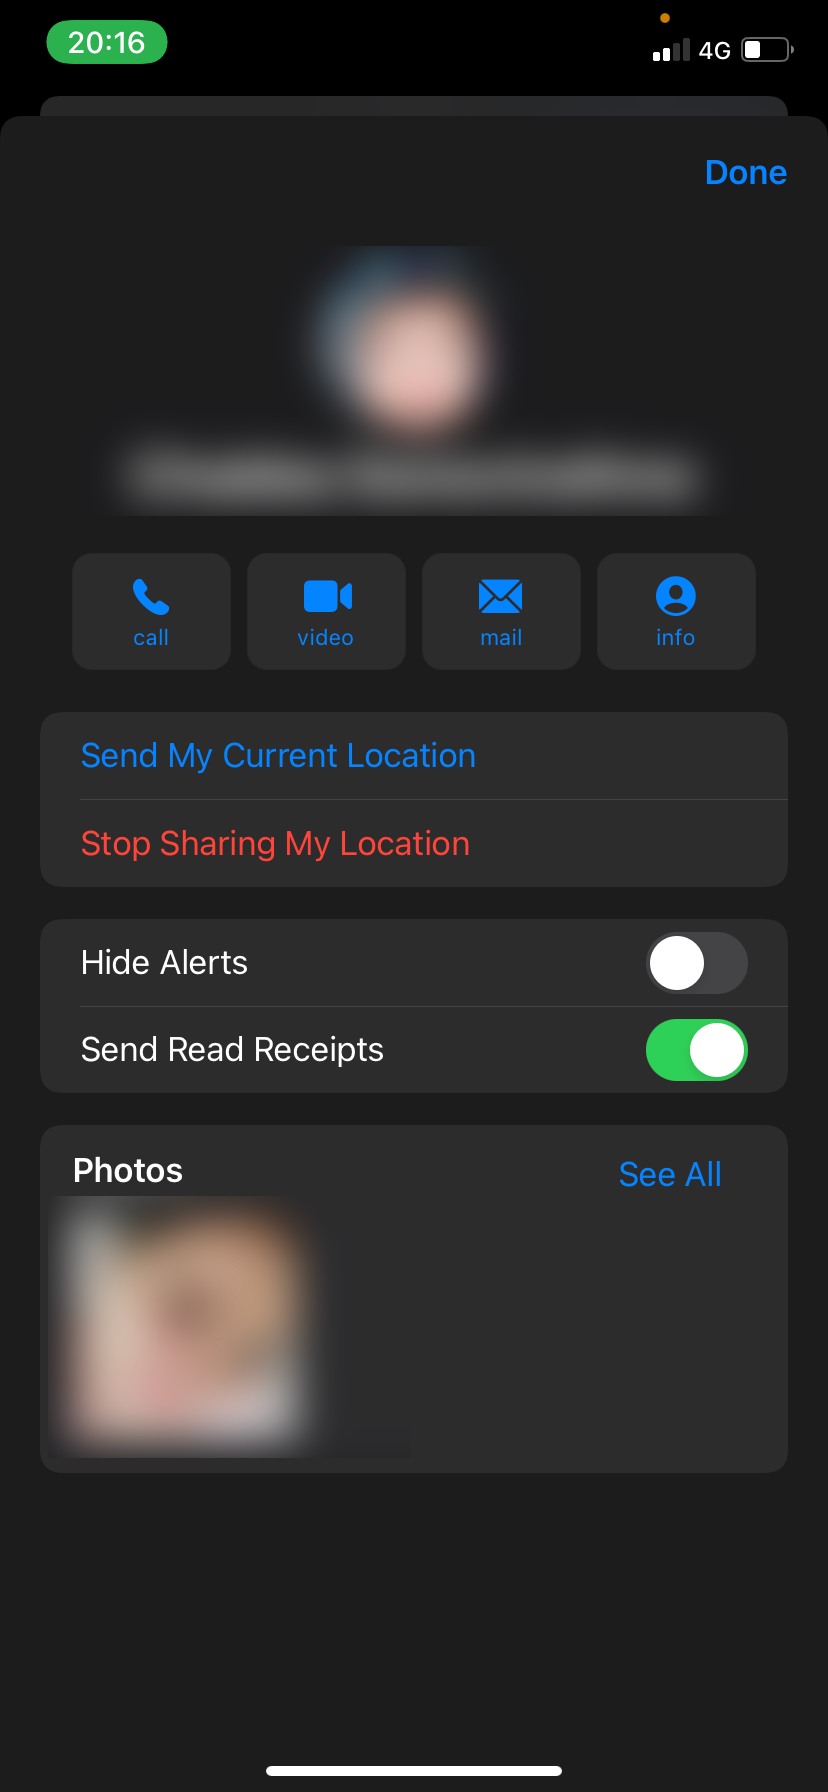 Stopping location sharing for a contact.